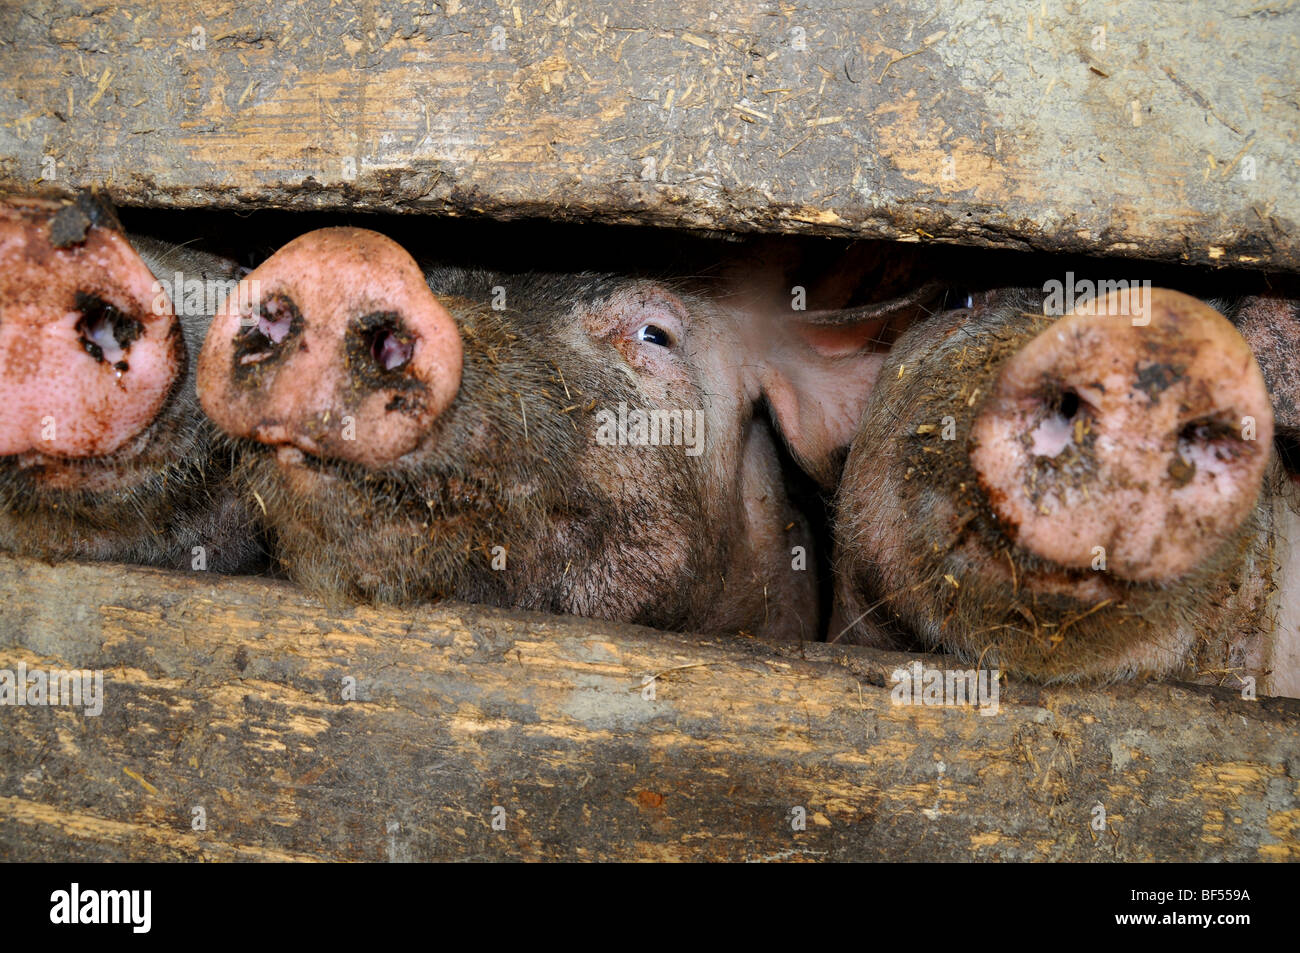 free range pigs : pigs in an outdoor breeding site in a brittany bio farm Stock Photo